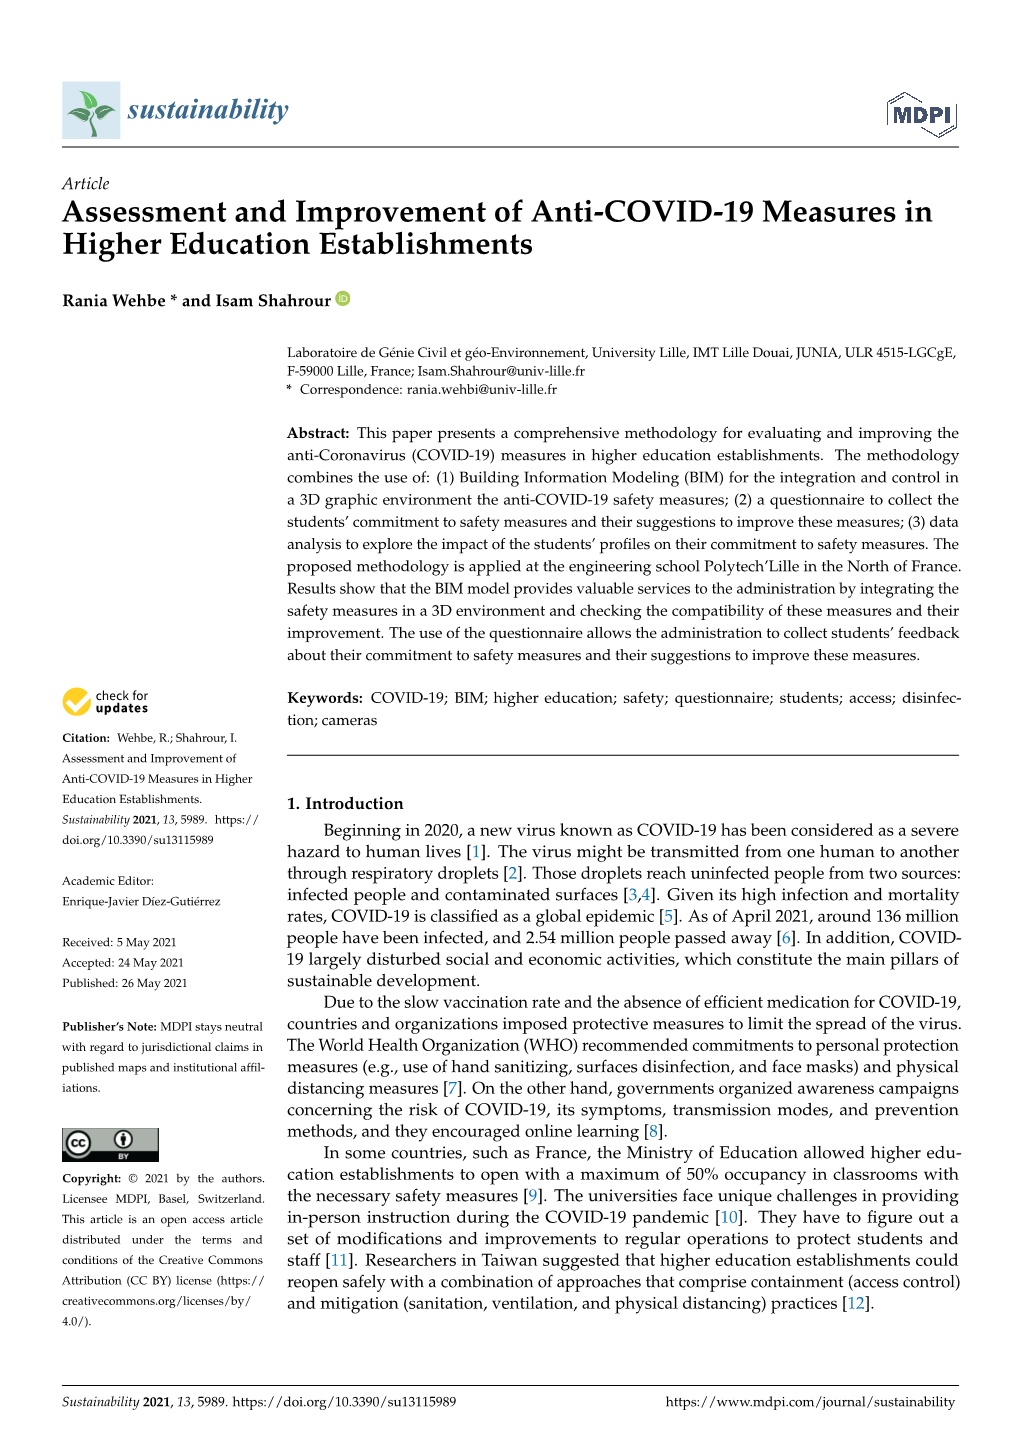 Assessment and Improvement of Anti-COVID-19 Measures in Higher Education Establishments